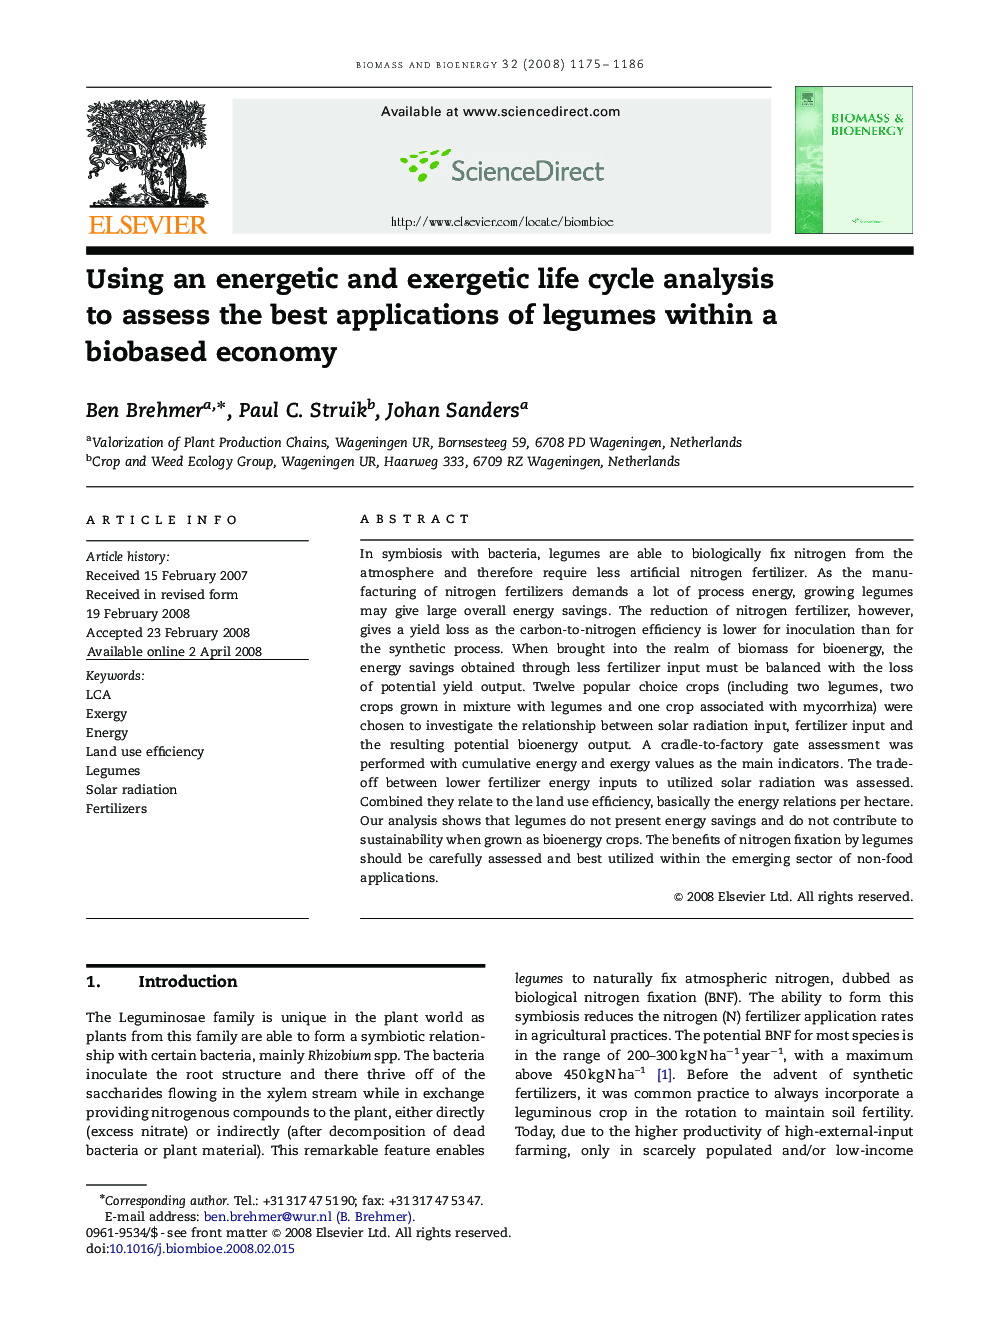 Using an energetic and exergetic life cycle analysis to assess the best applications of legumes within a biobased economy